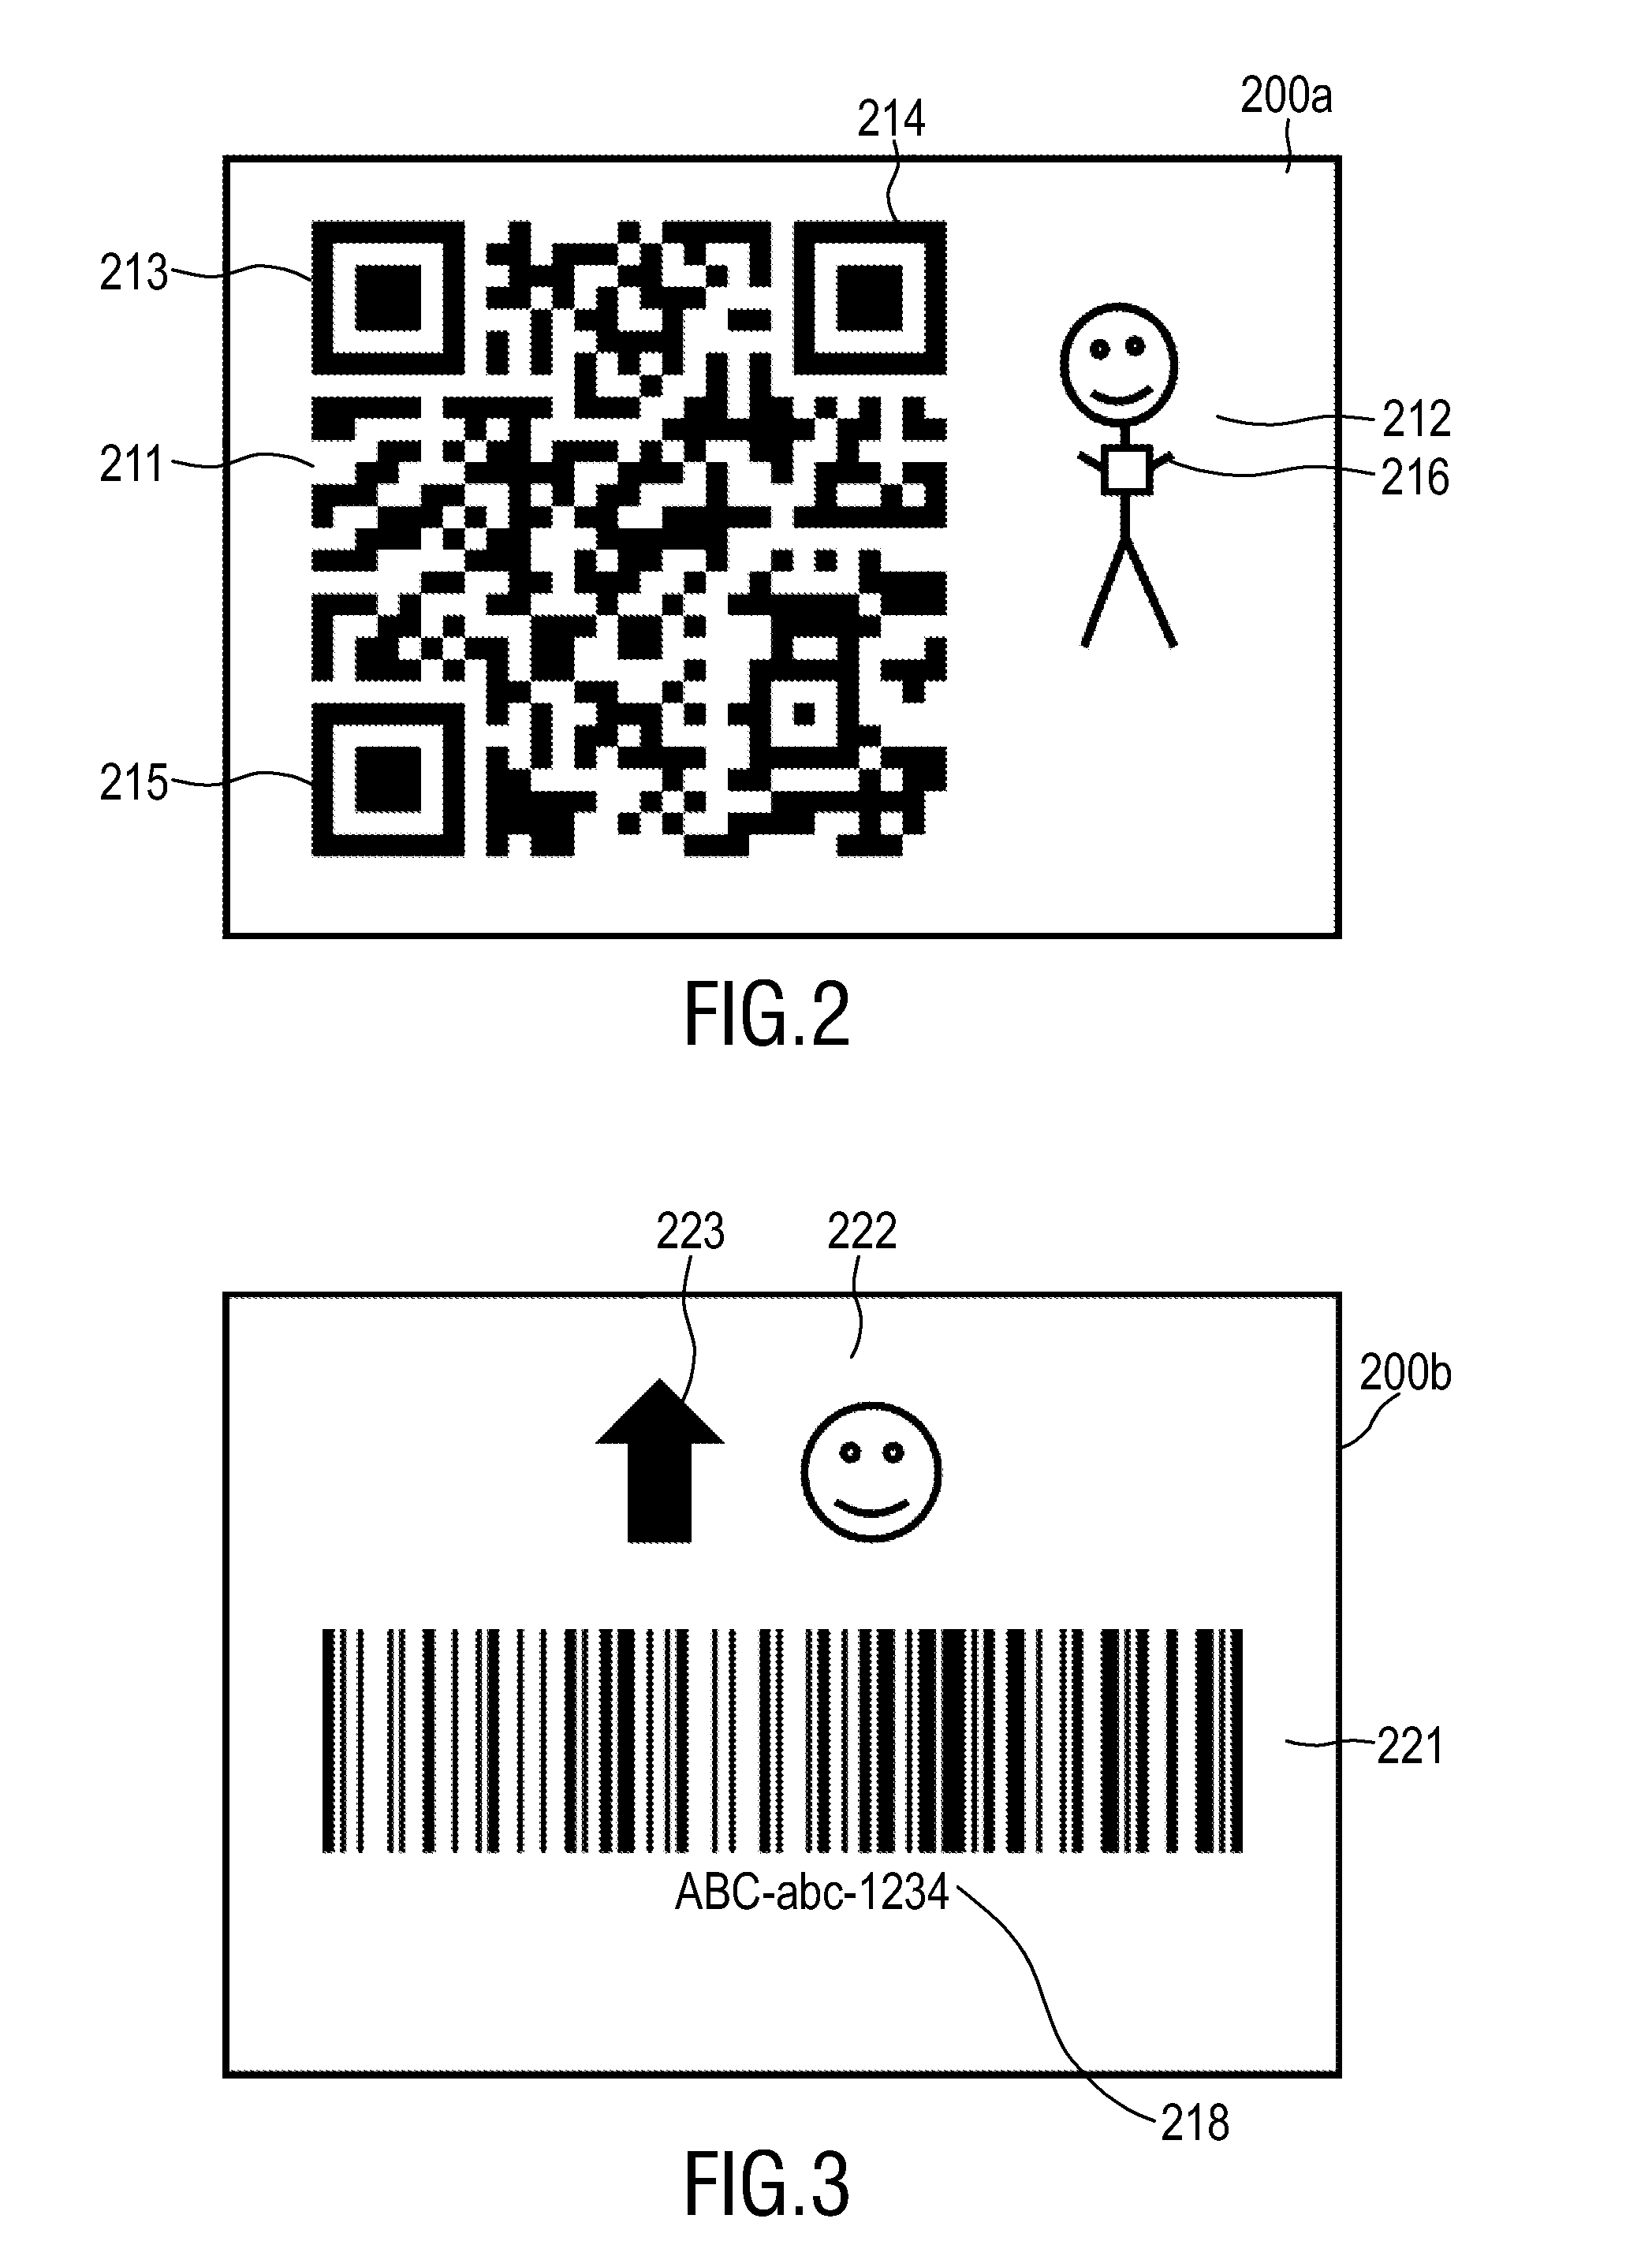 System and method for determining vital sign information